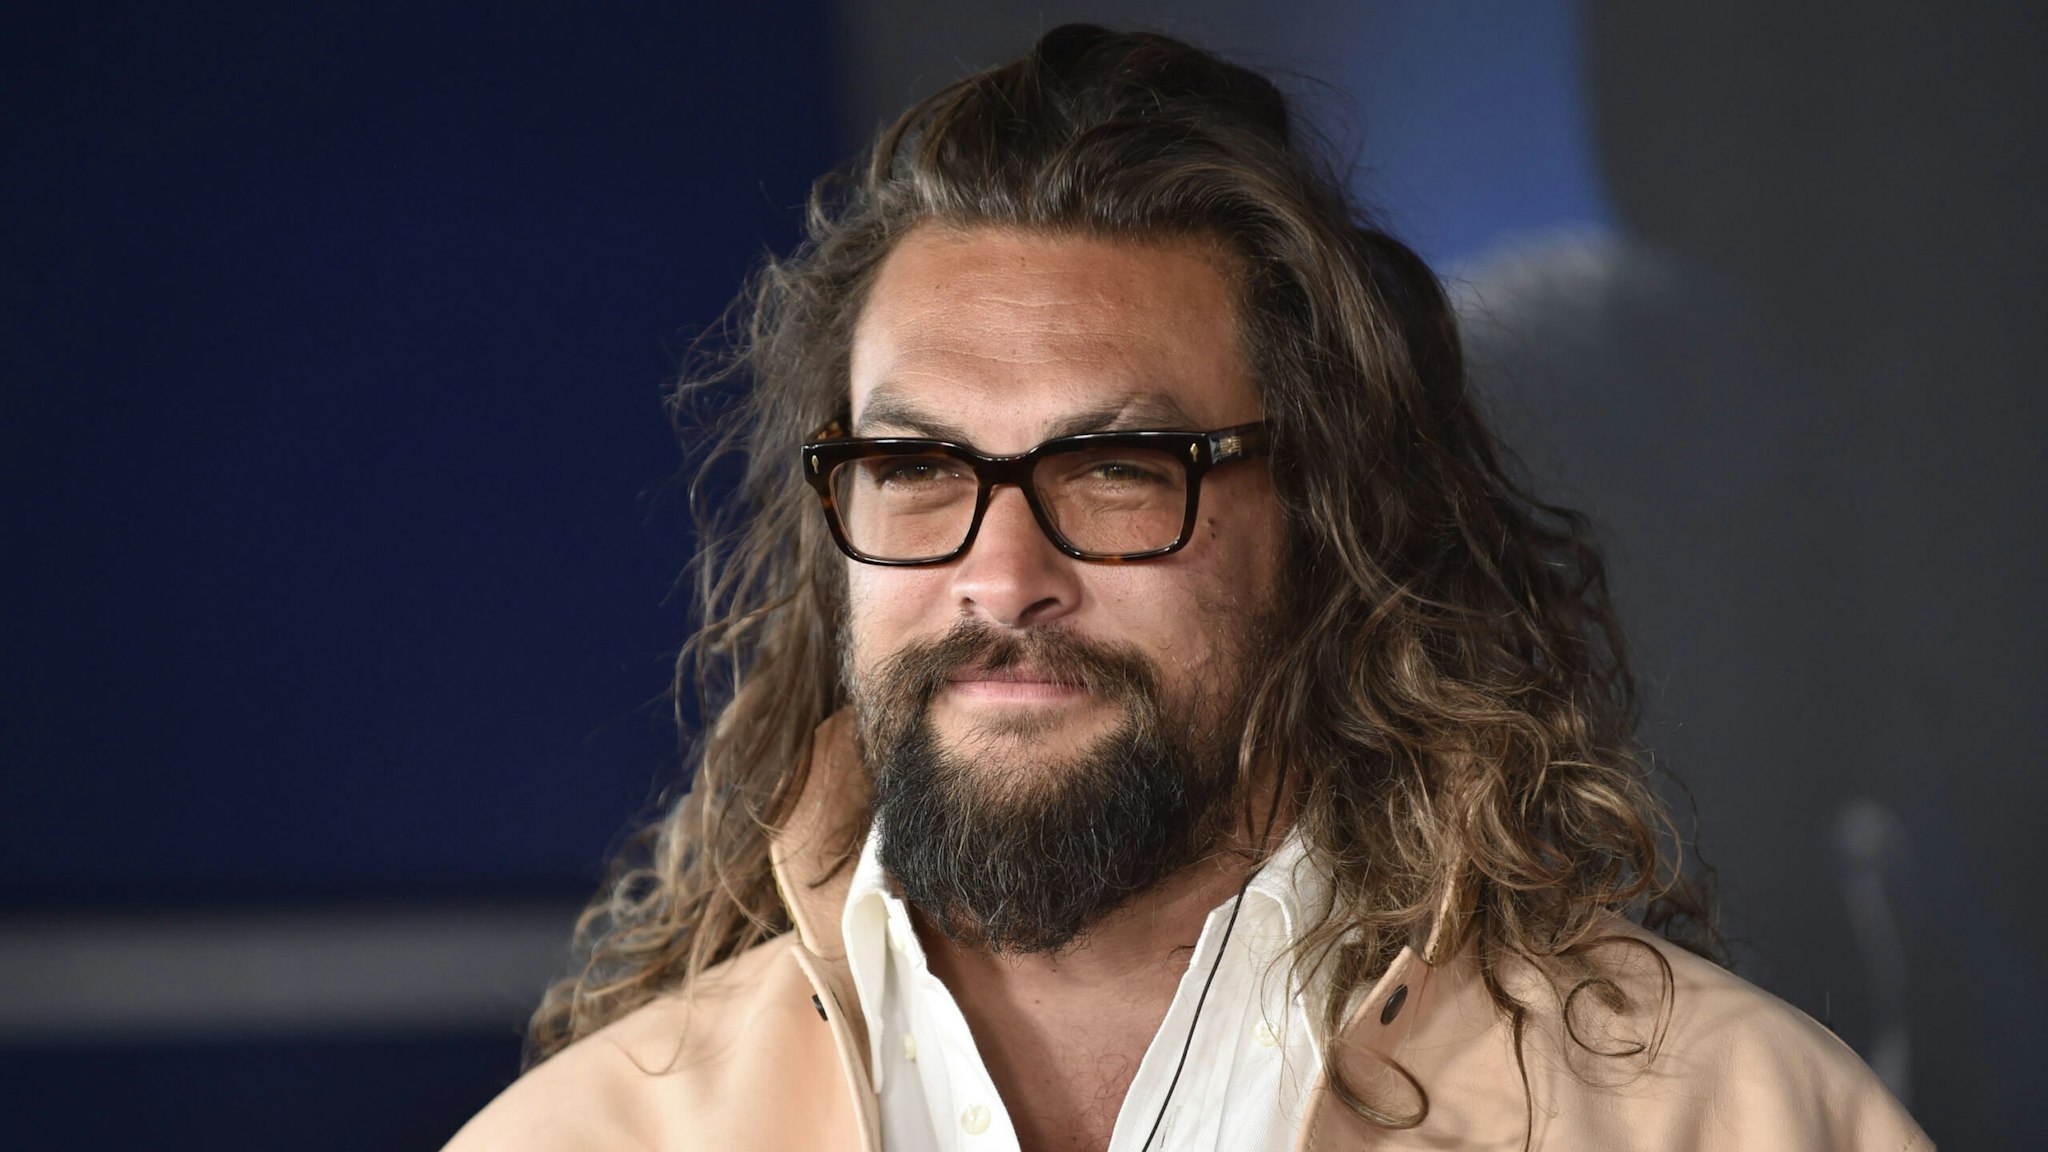 LOS ANGELES, CALIFORNIA - APRIL 04: Jason Mamoa attends the Los Angeles Premiere of "Ambulance" at Academy Museum of Motion Pictures on April 04, 2022 in Los Angeles, California.